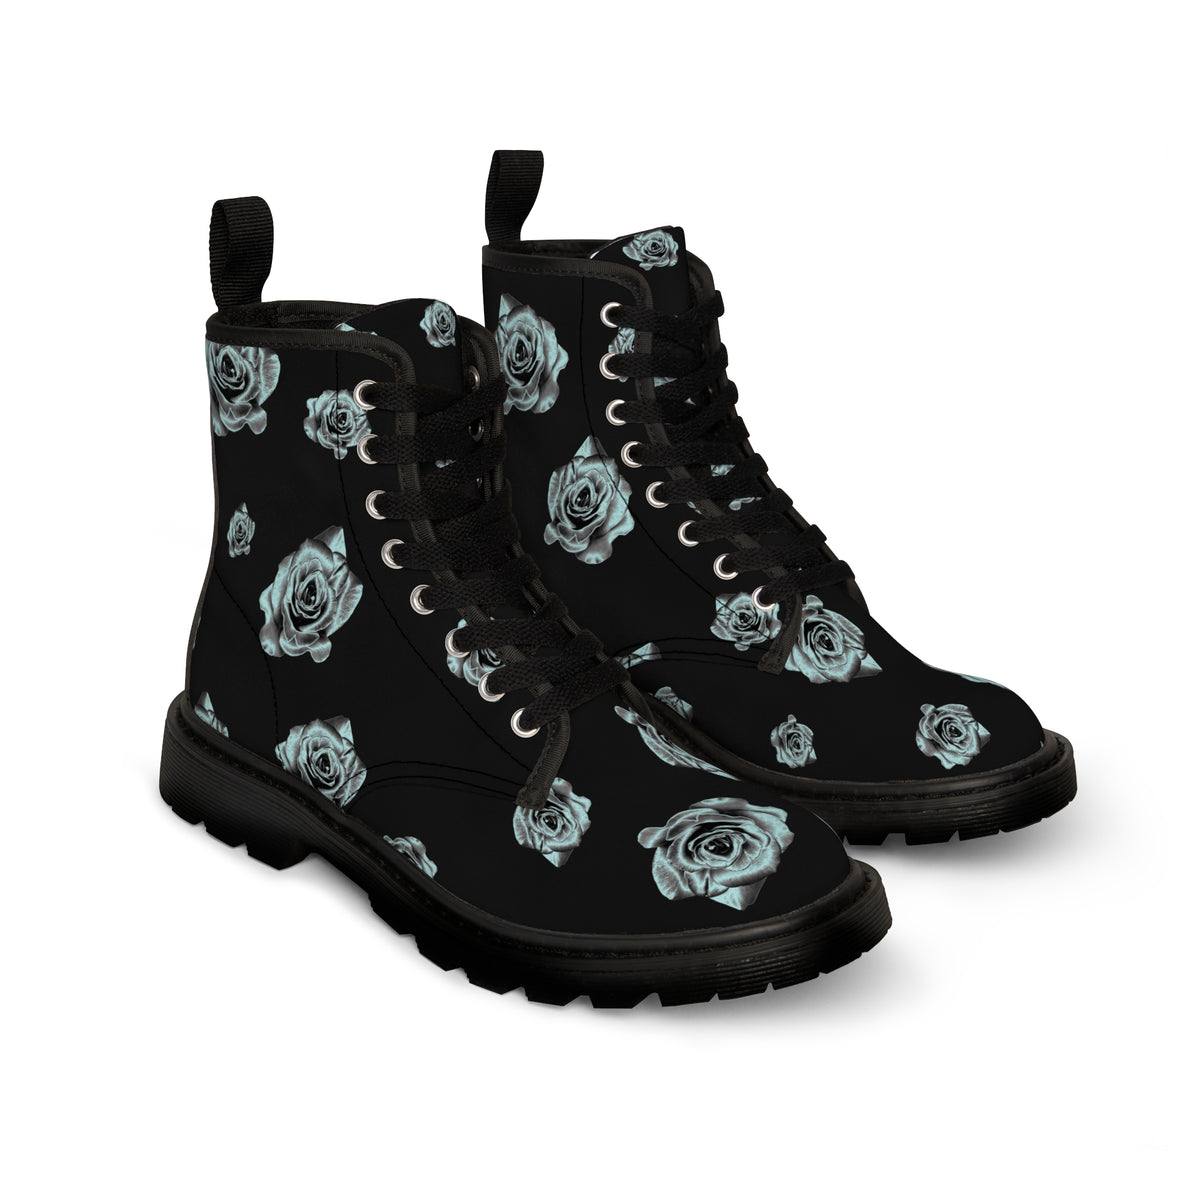 Women's black canvas boots with a silver rose pattern